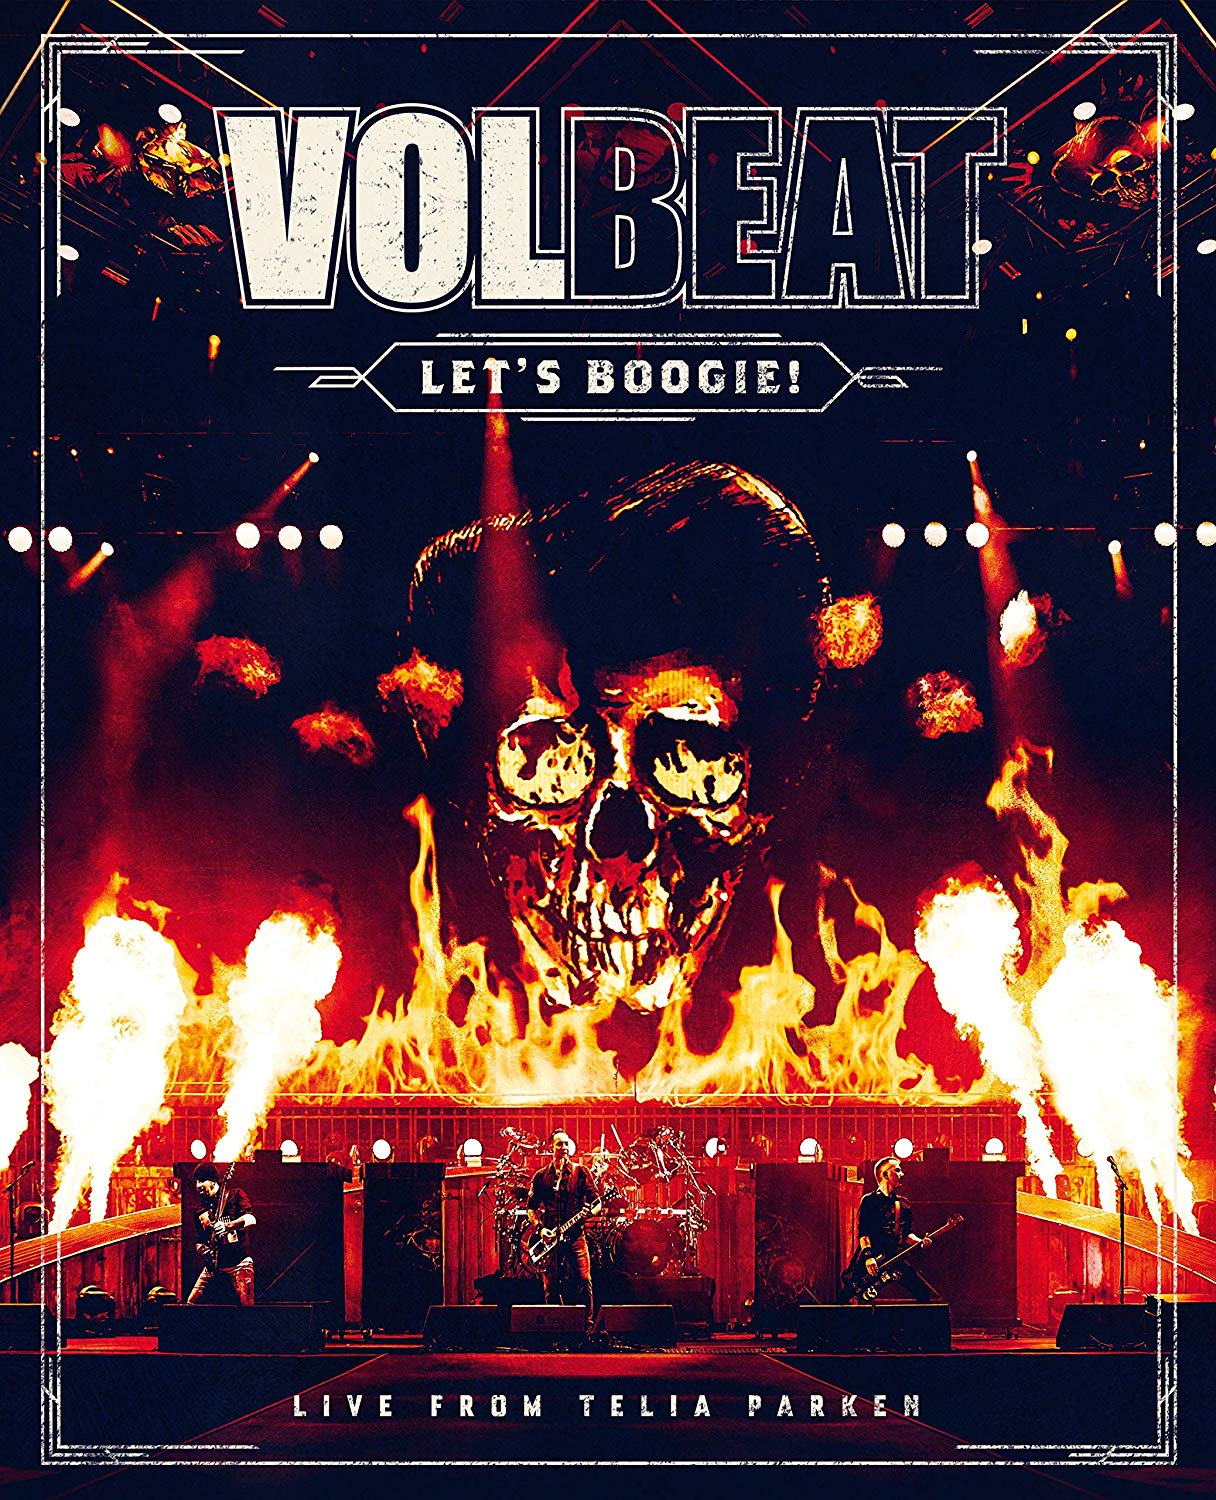 Cover - Volbeat - Let's Boogie! - Live from Telia Parken.jpg